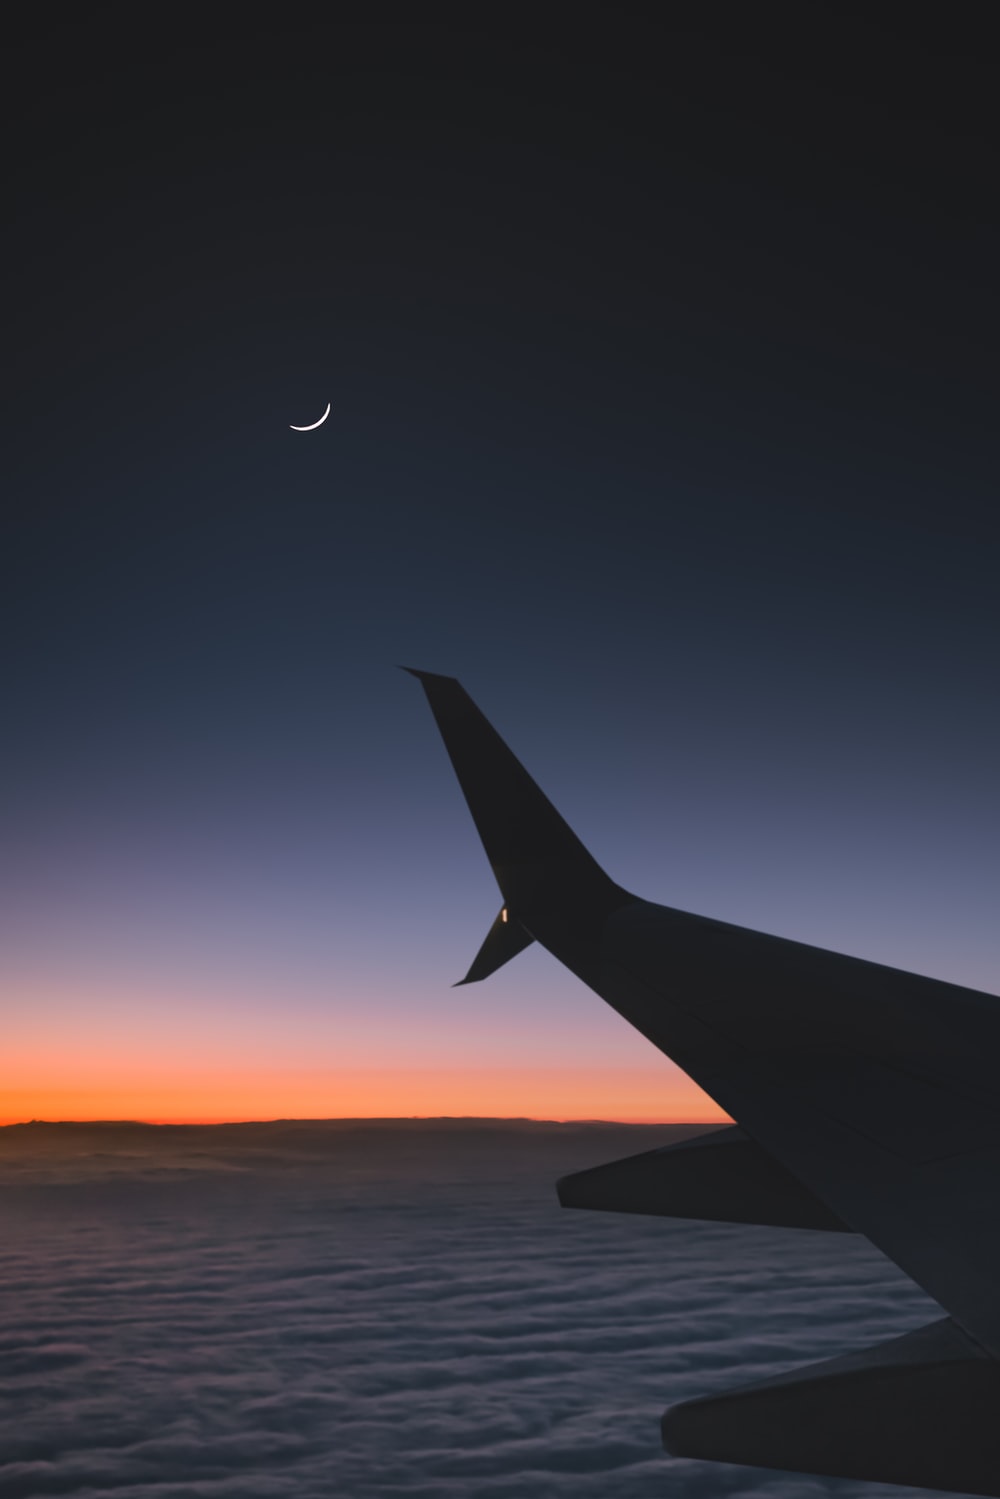 Night Flight Picture. Download Free Image